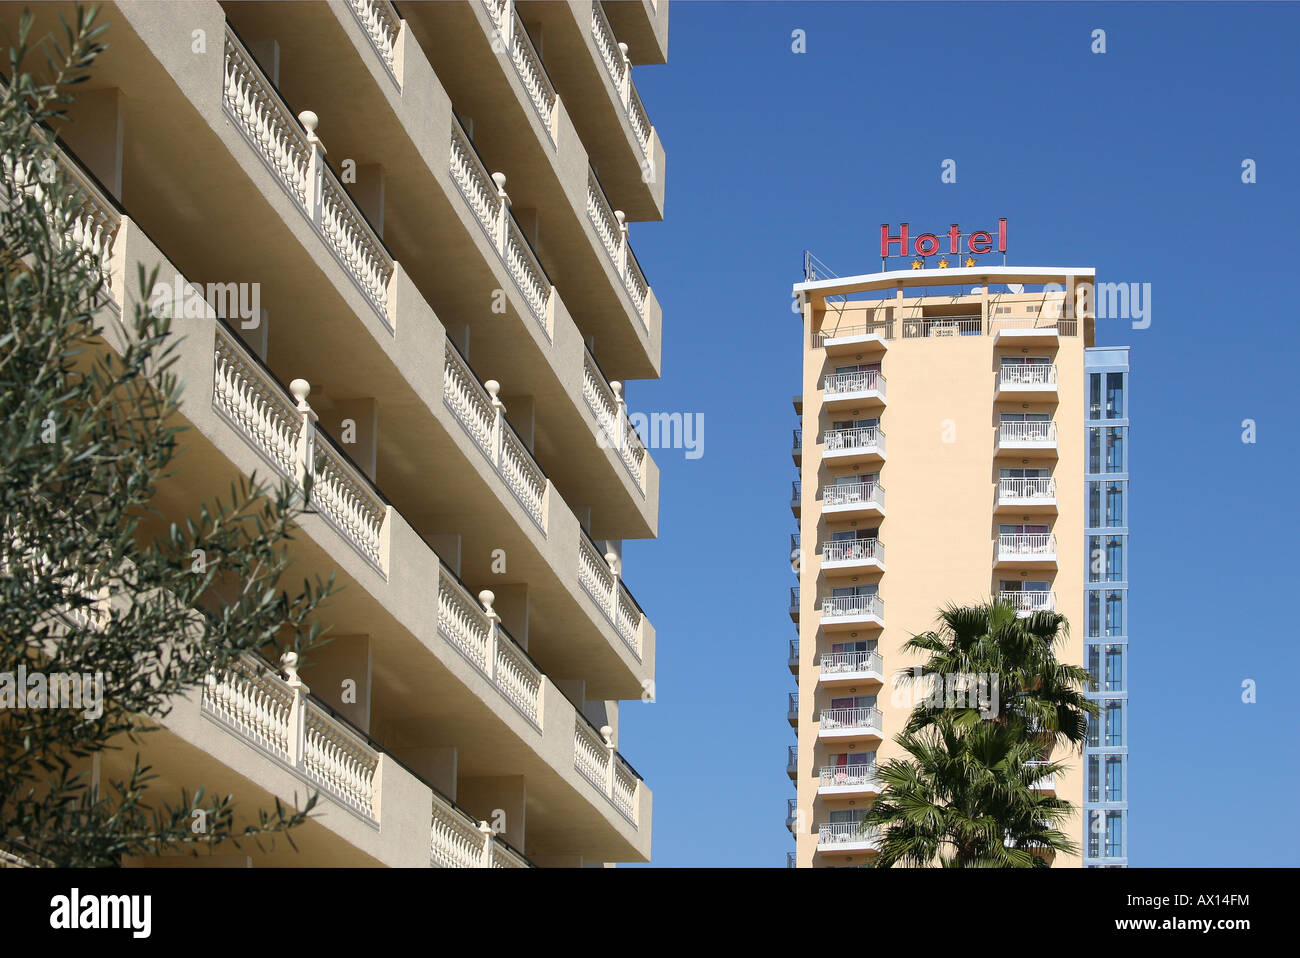 High rise hotels and balconies in Benidorm, Spain. Stock Photo